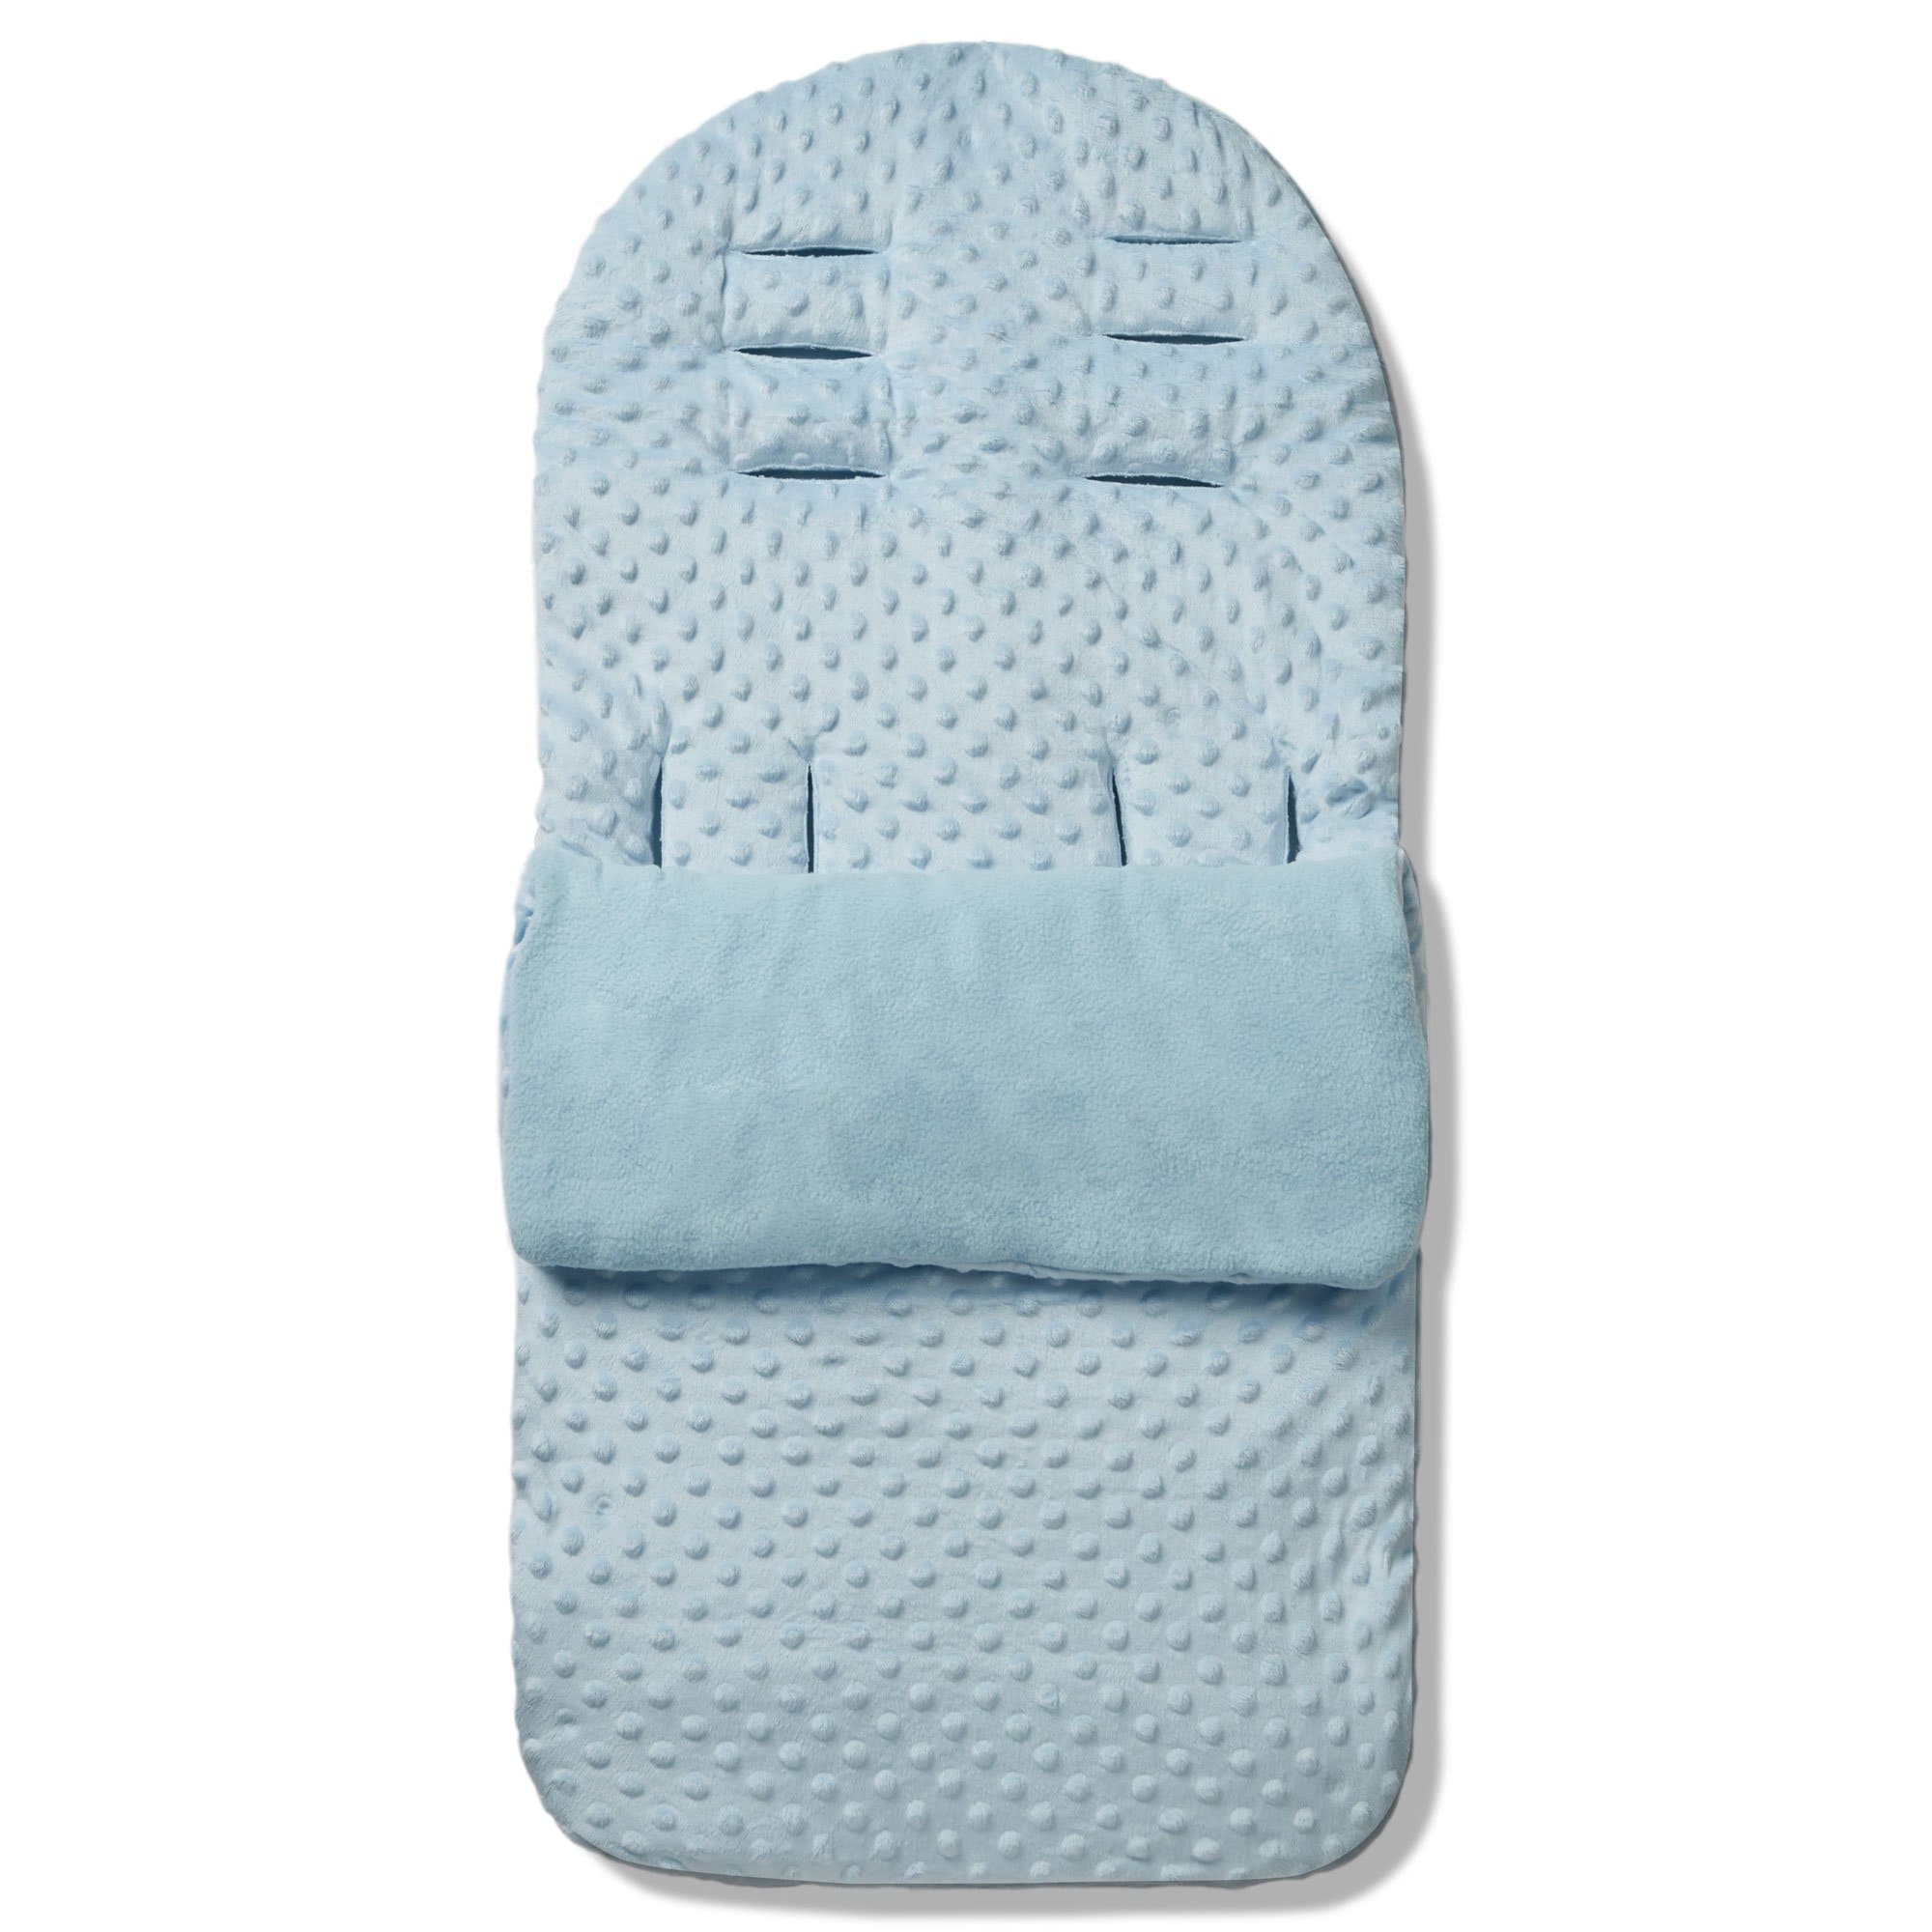 Dimple Footmuff / Cosy Toes Compatible with Inglesina - For Your Little One